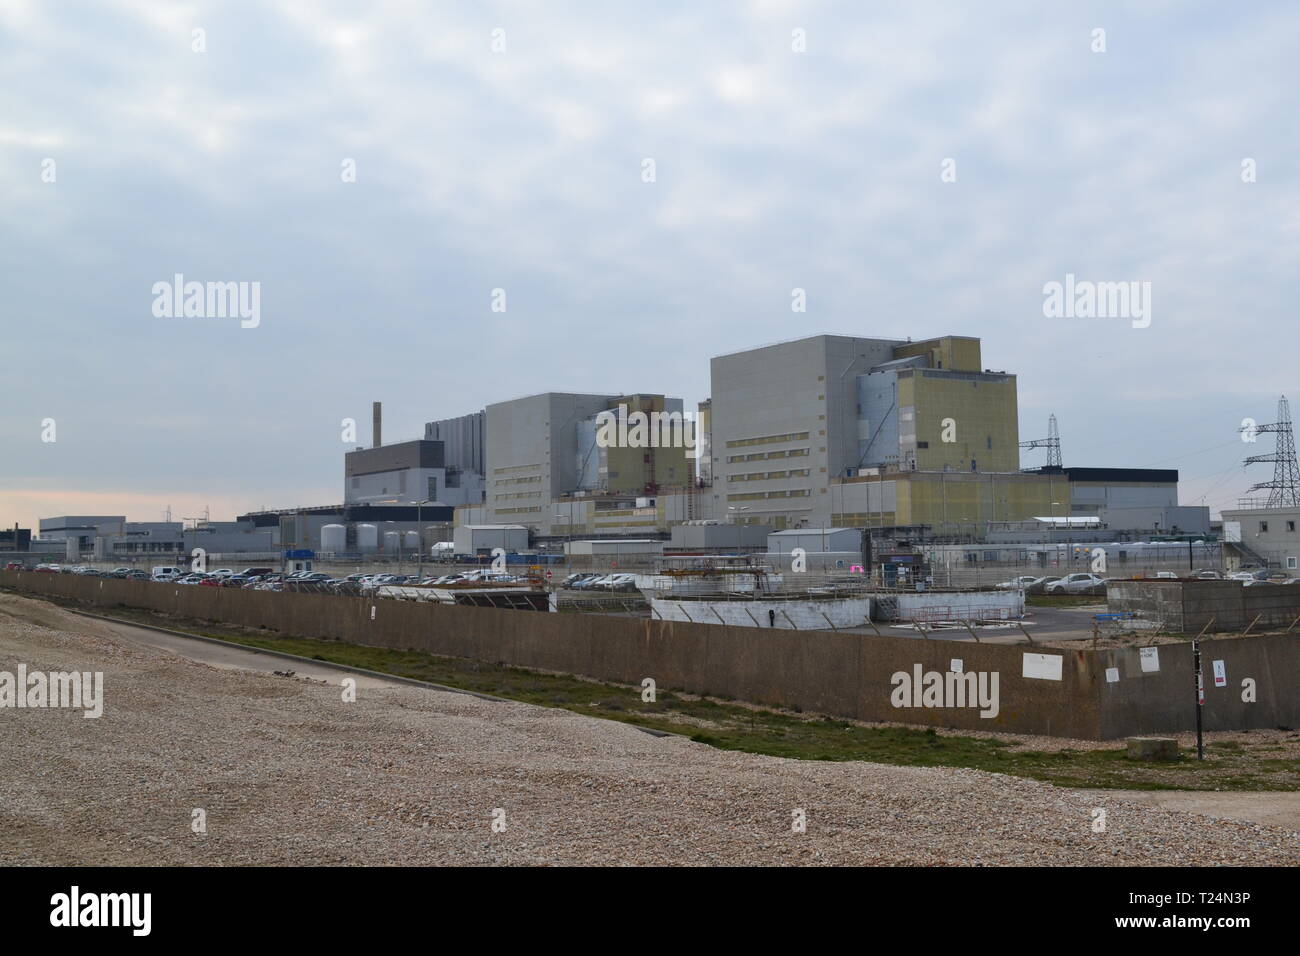 Dungeness A nuclear power station, decommissioned in 2006. The facility sits behind the rare and ecologlically valuable shingle banks Stock Photo